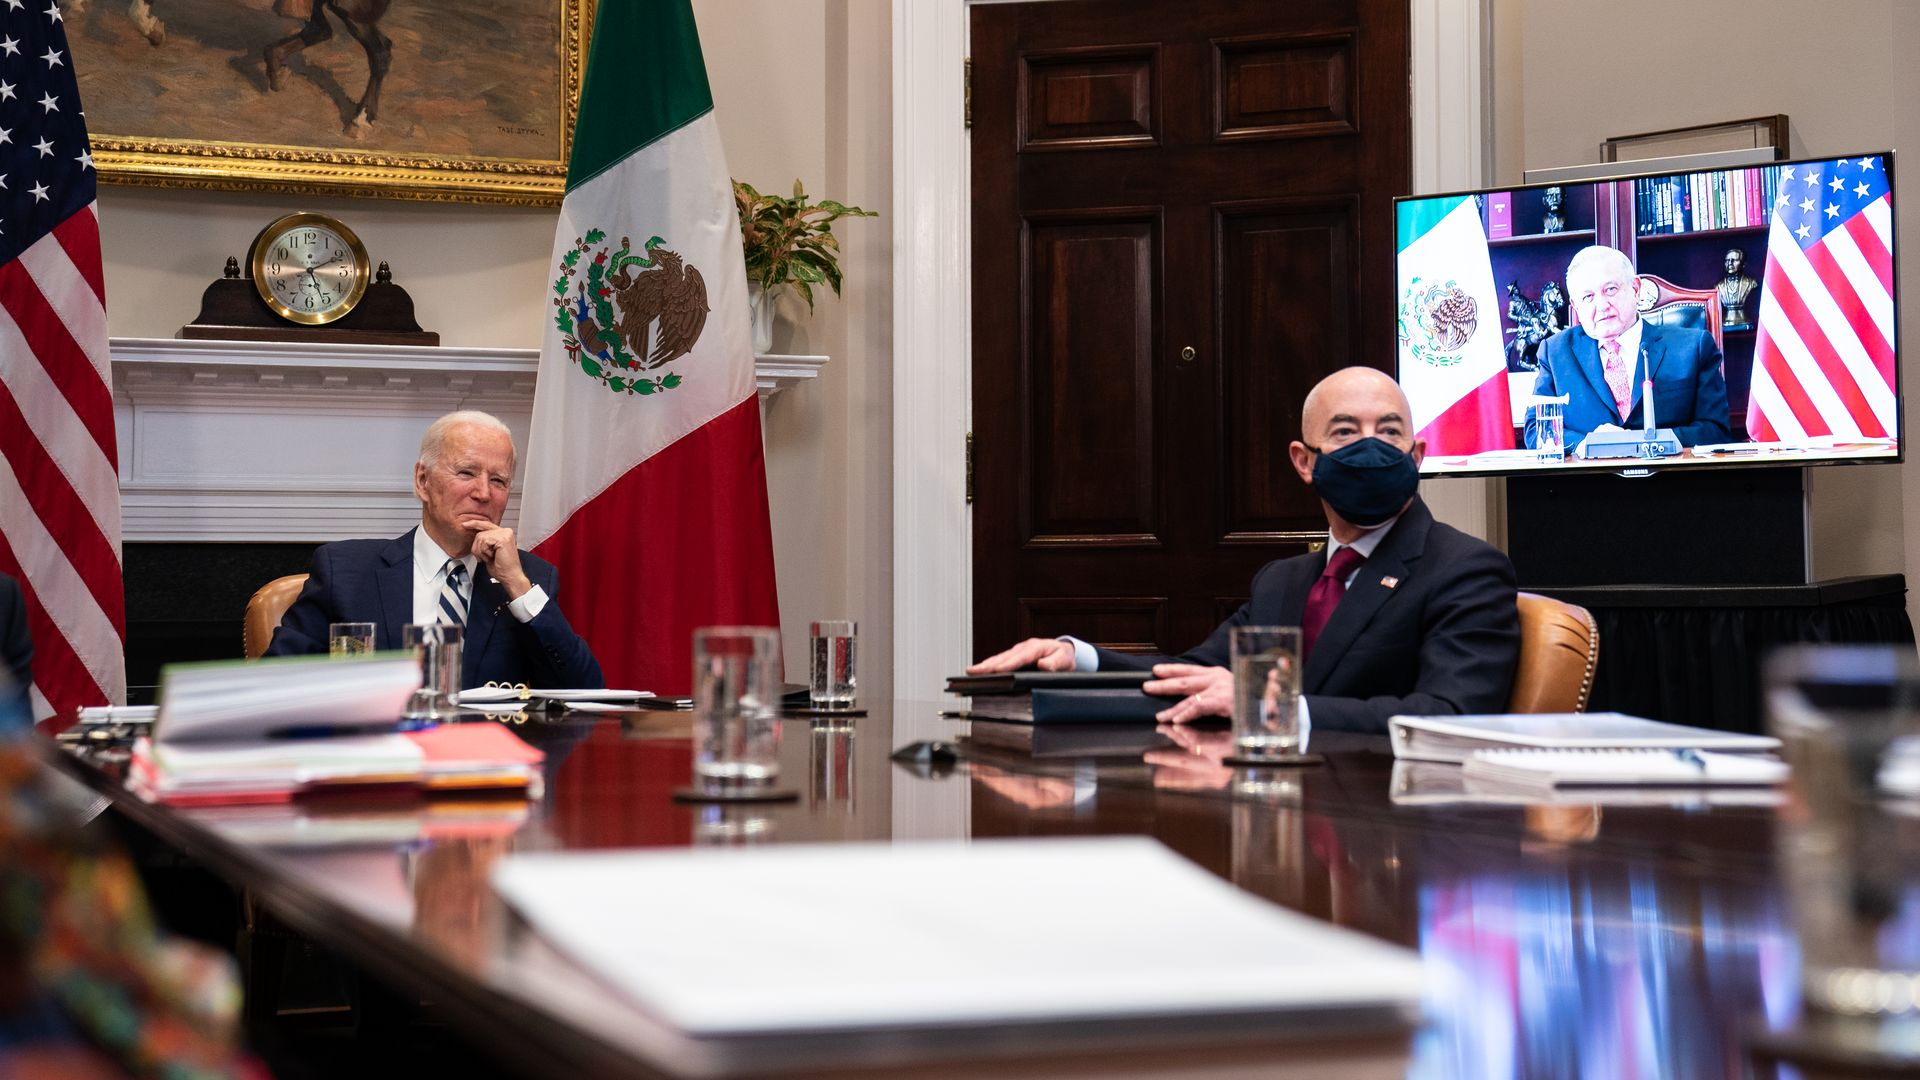 President Biden with Secretary of Homeland Security Alejandro in the White House in March 2021.